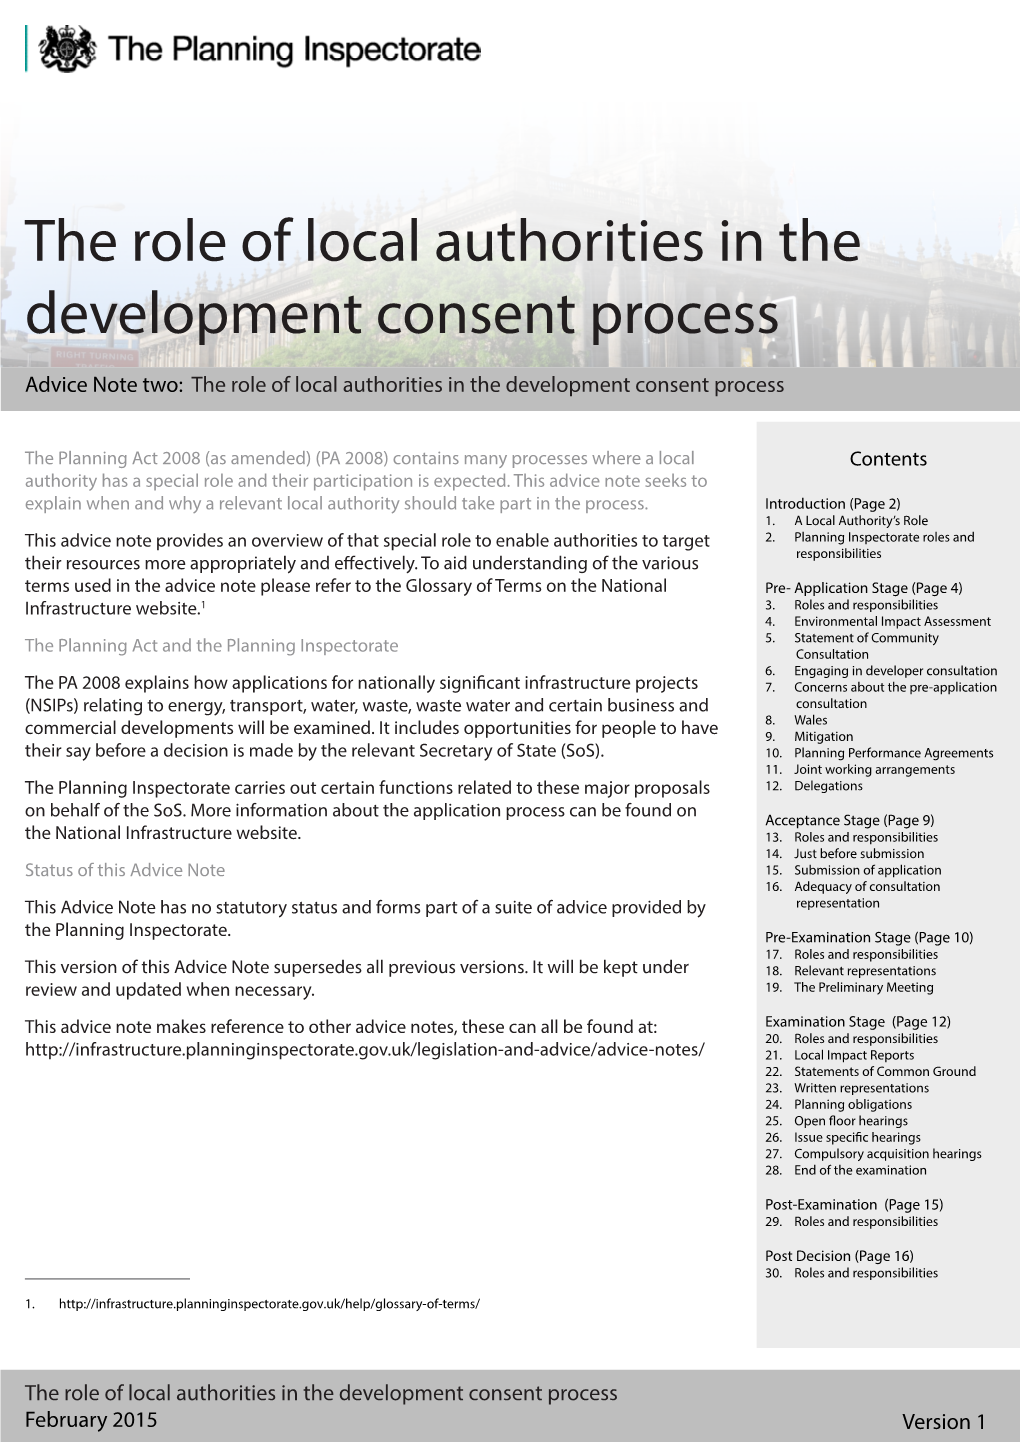 The Role of Local Authorities in the Development Consent Process